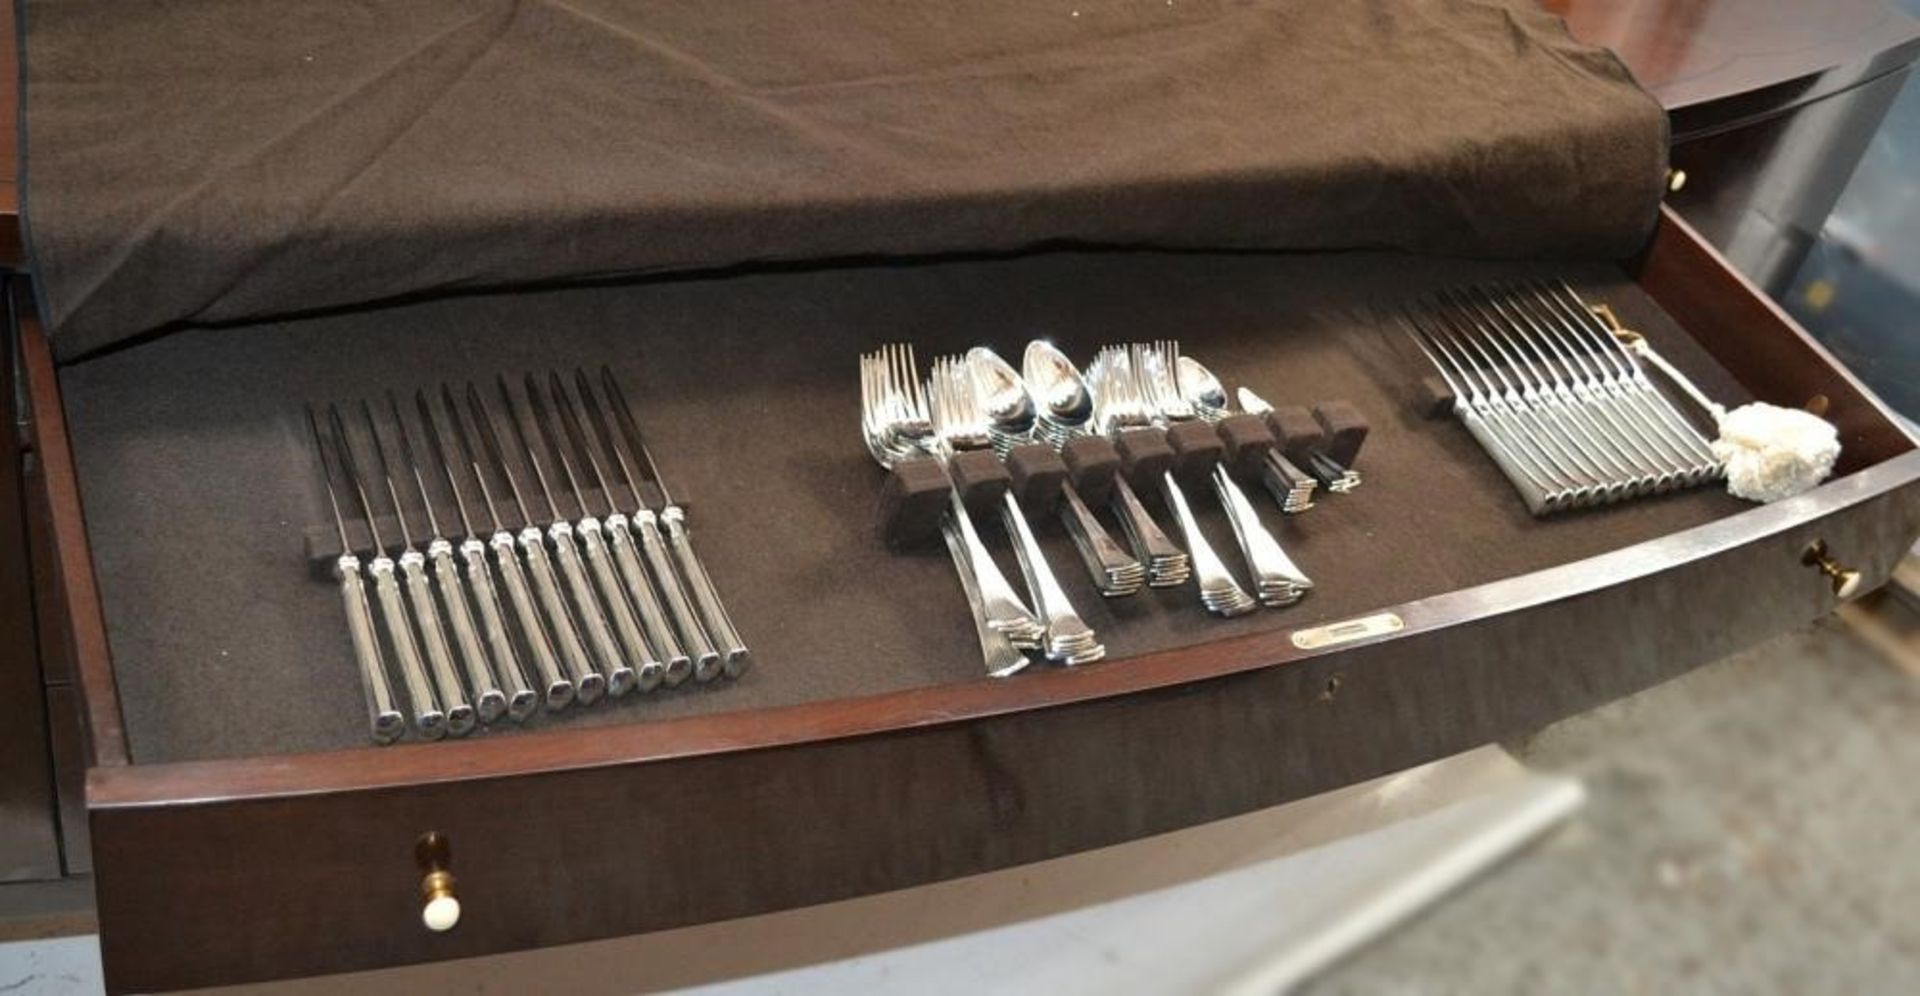 1 x BARBARA BARRY FOR HENREDON Bowmant Server In Walnut - Includes 72 pc Cutlery Set - Ref: 5962013 - Image 10 of 19